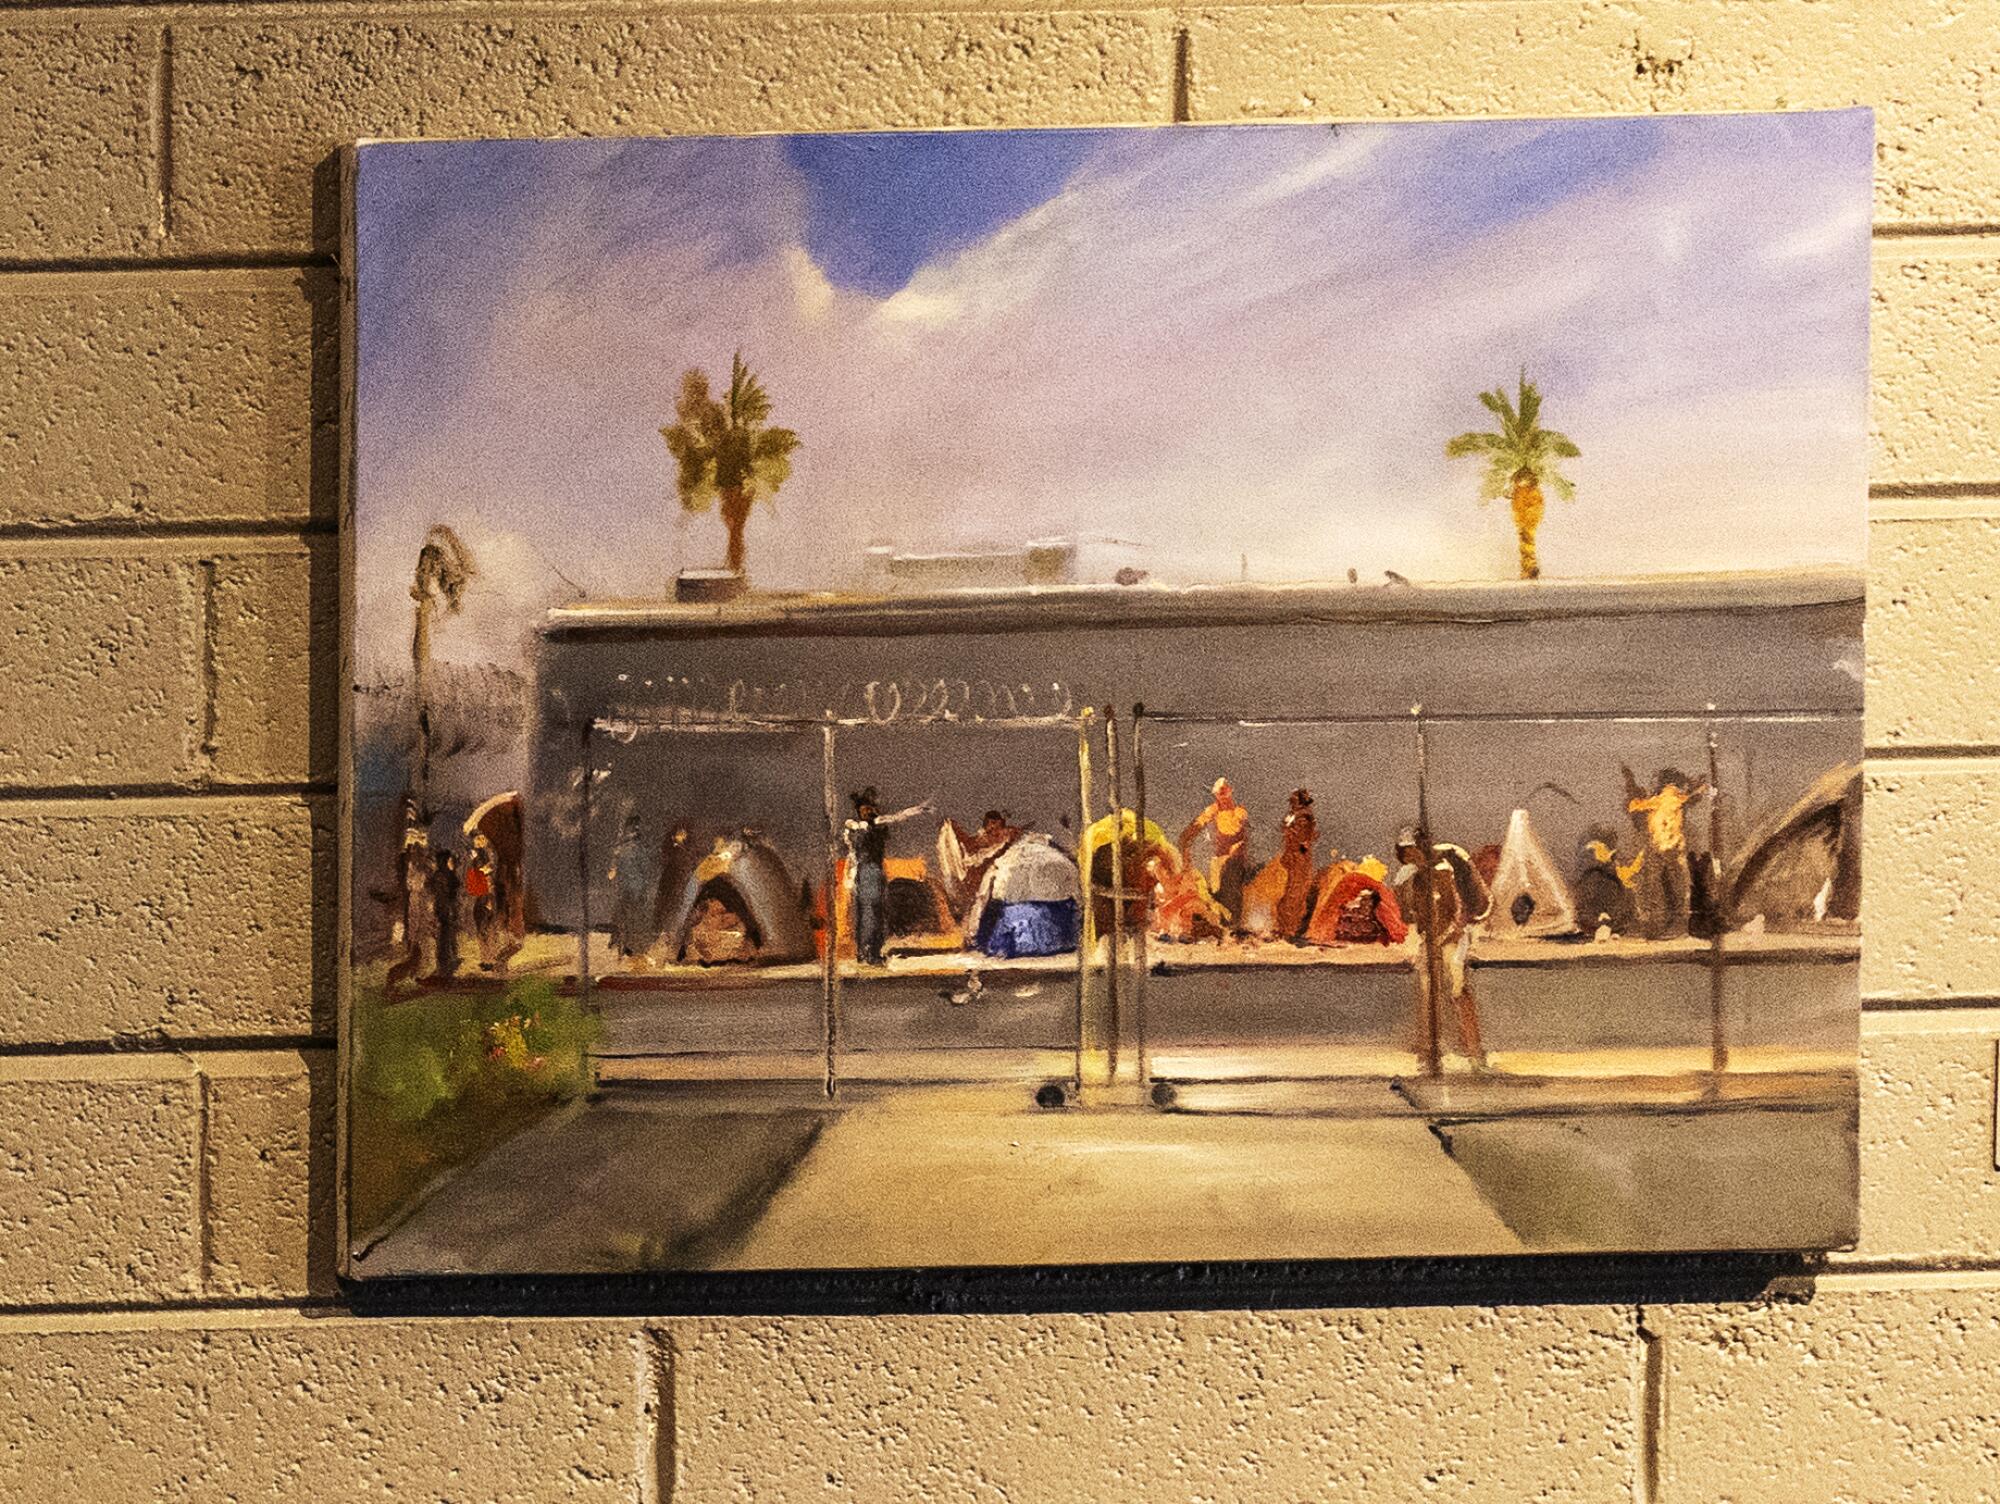 One of Joel Coplin's paintings is a real life scene of a homeless encampment outside his gallery and 